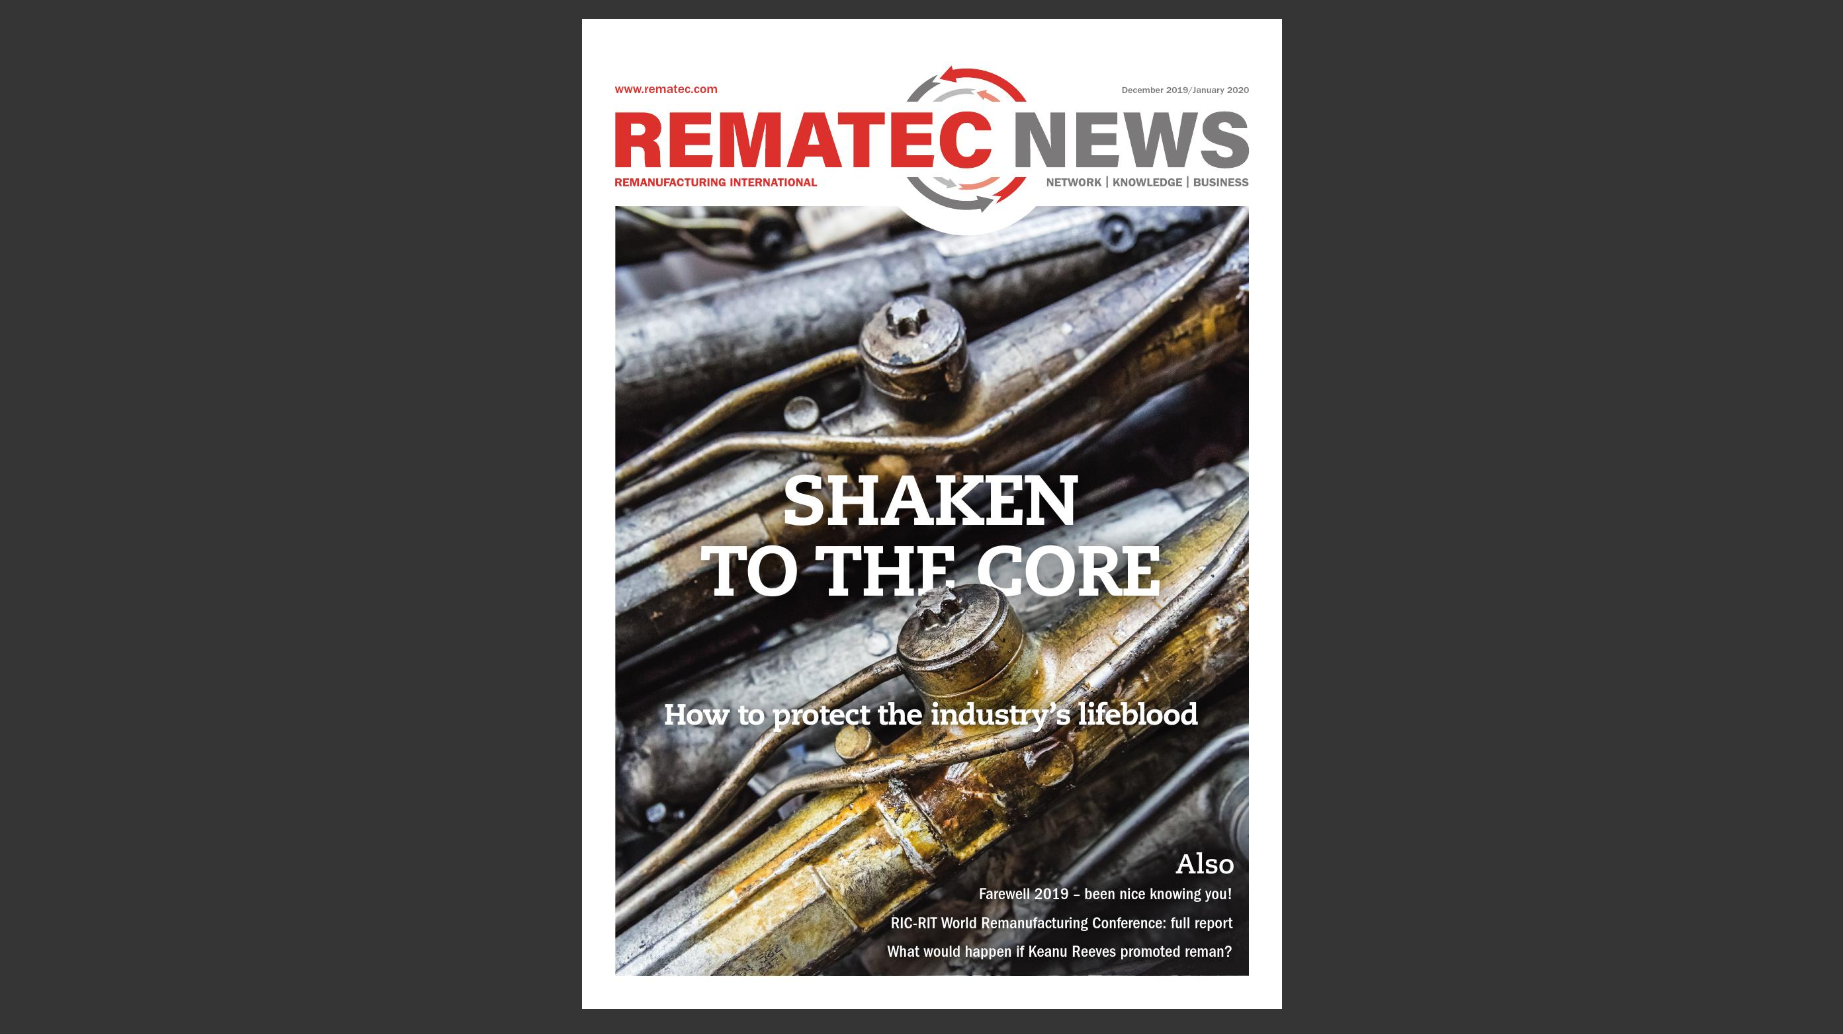 Latest edition Rematec News: Shaken to the core